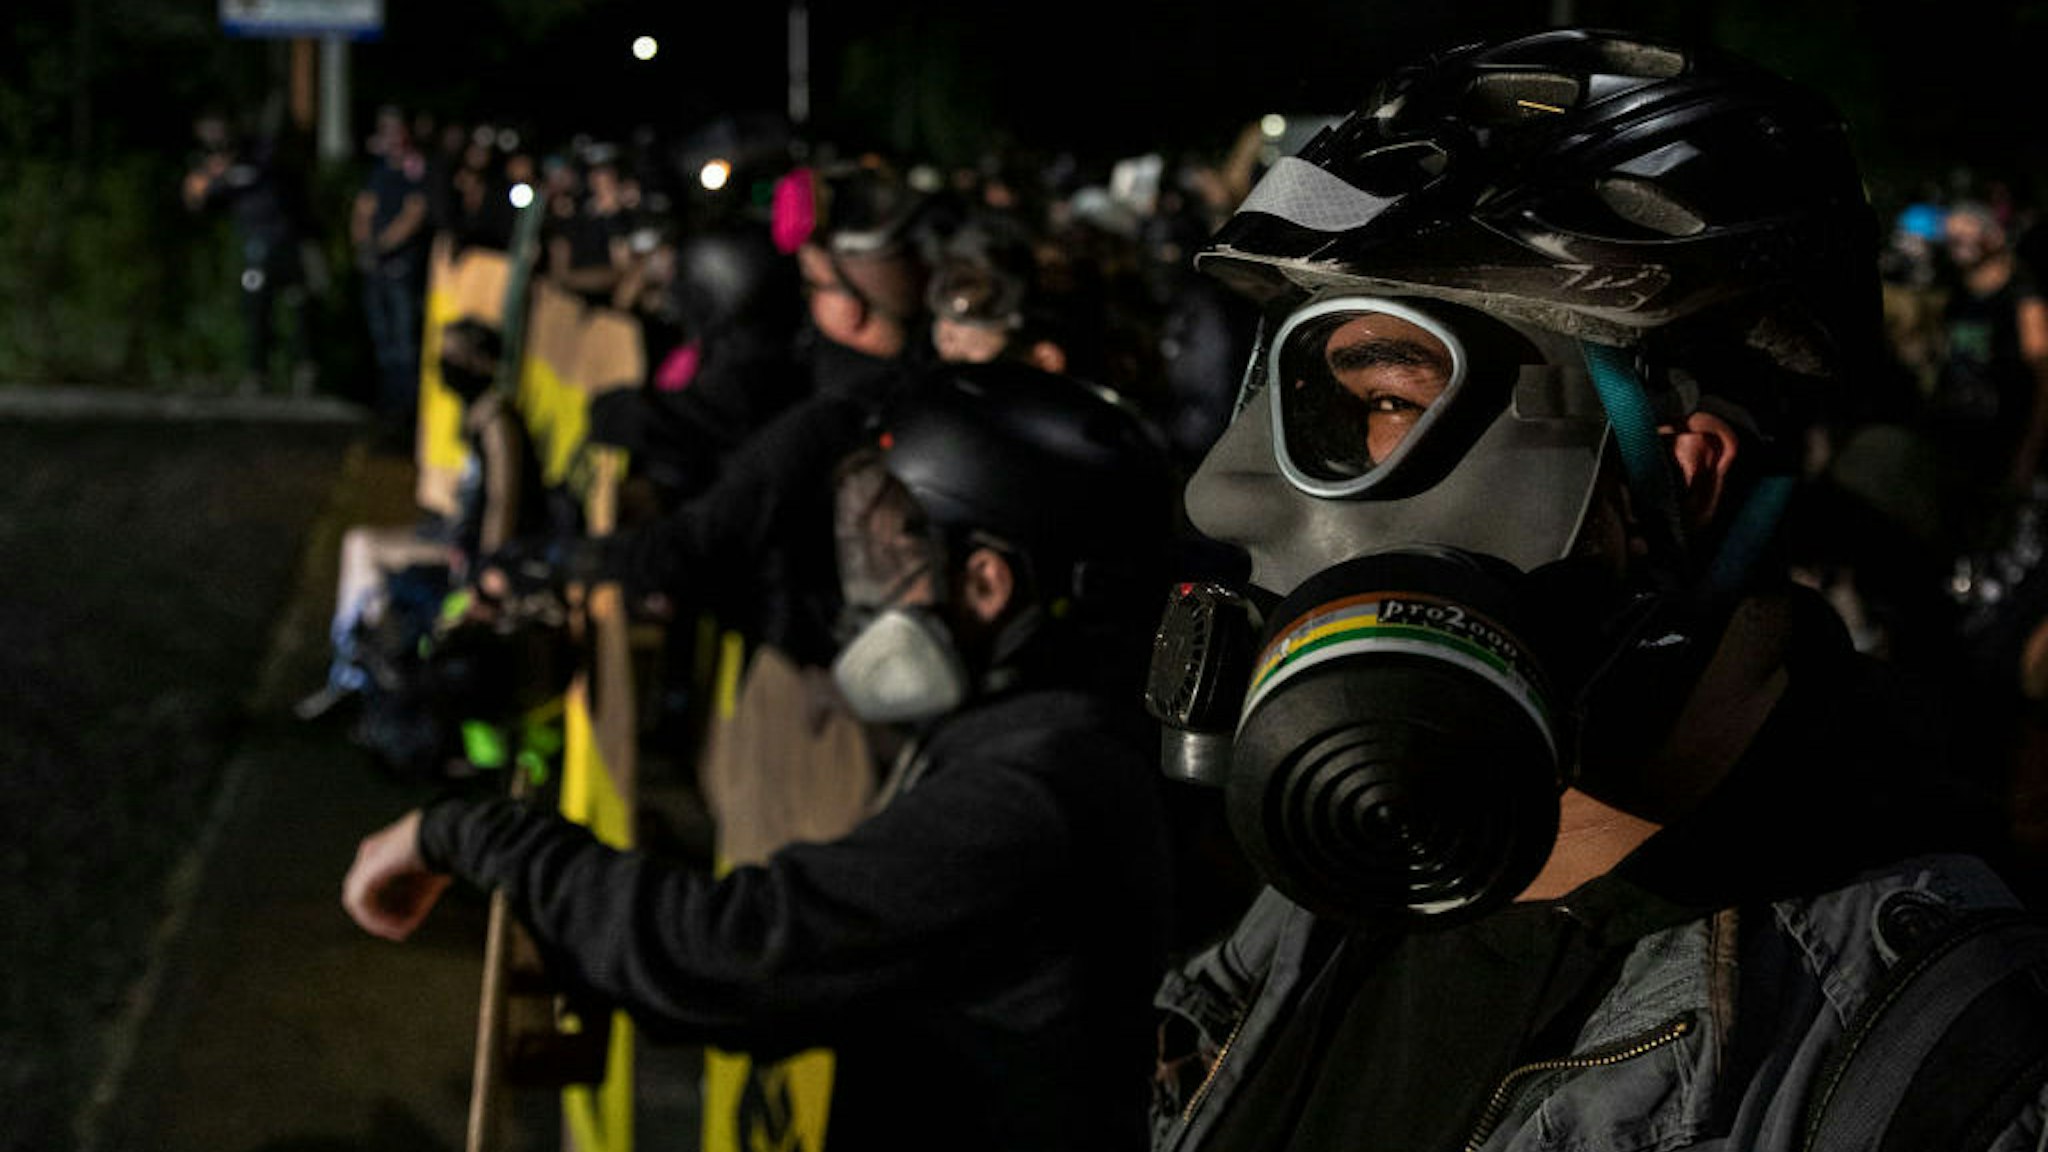 Protesters are seen during a standoff at a Portland police precinct in Portland, Oregon on August 15, 2020. Protests have continued for the 80th consecutive night in Portland since the killing of George Floyd. (Photo by Paula Bronstein/Getty Images )